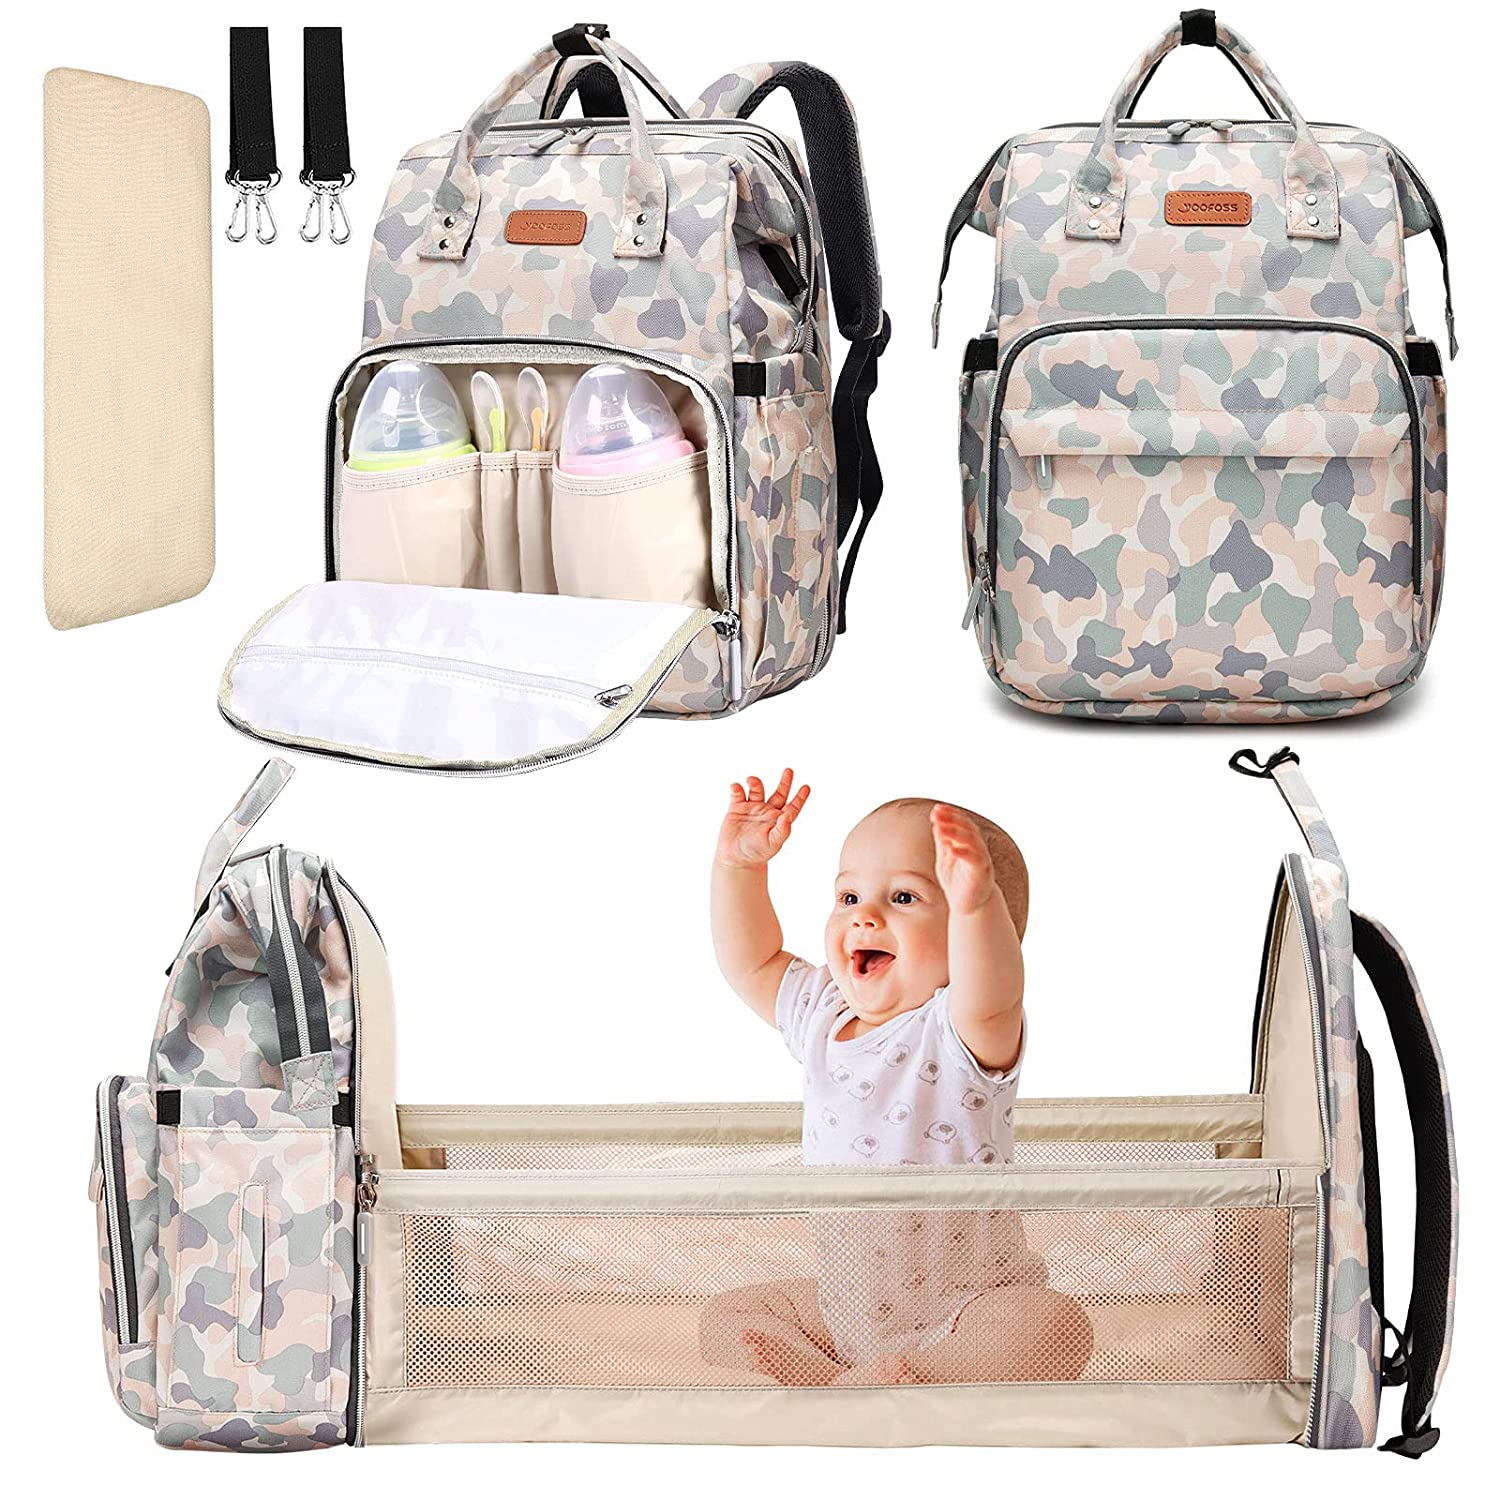 VS VOGSHOW Diaper Bag Backpack, Multifunction Stylish Travel Baby Bag  Backpack with Crossbody Strap, Maternity Nappy Bag